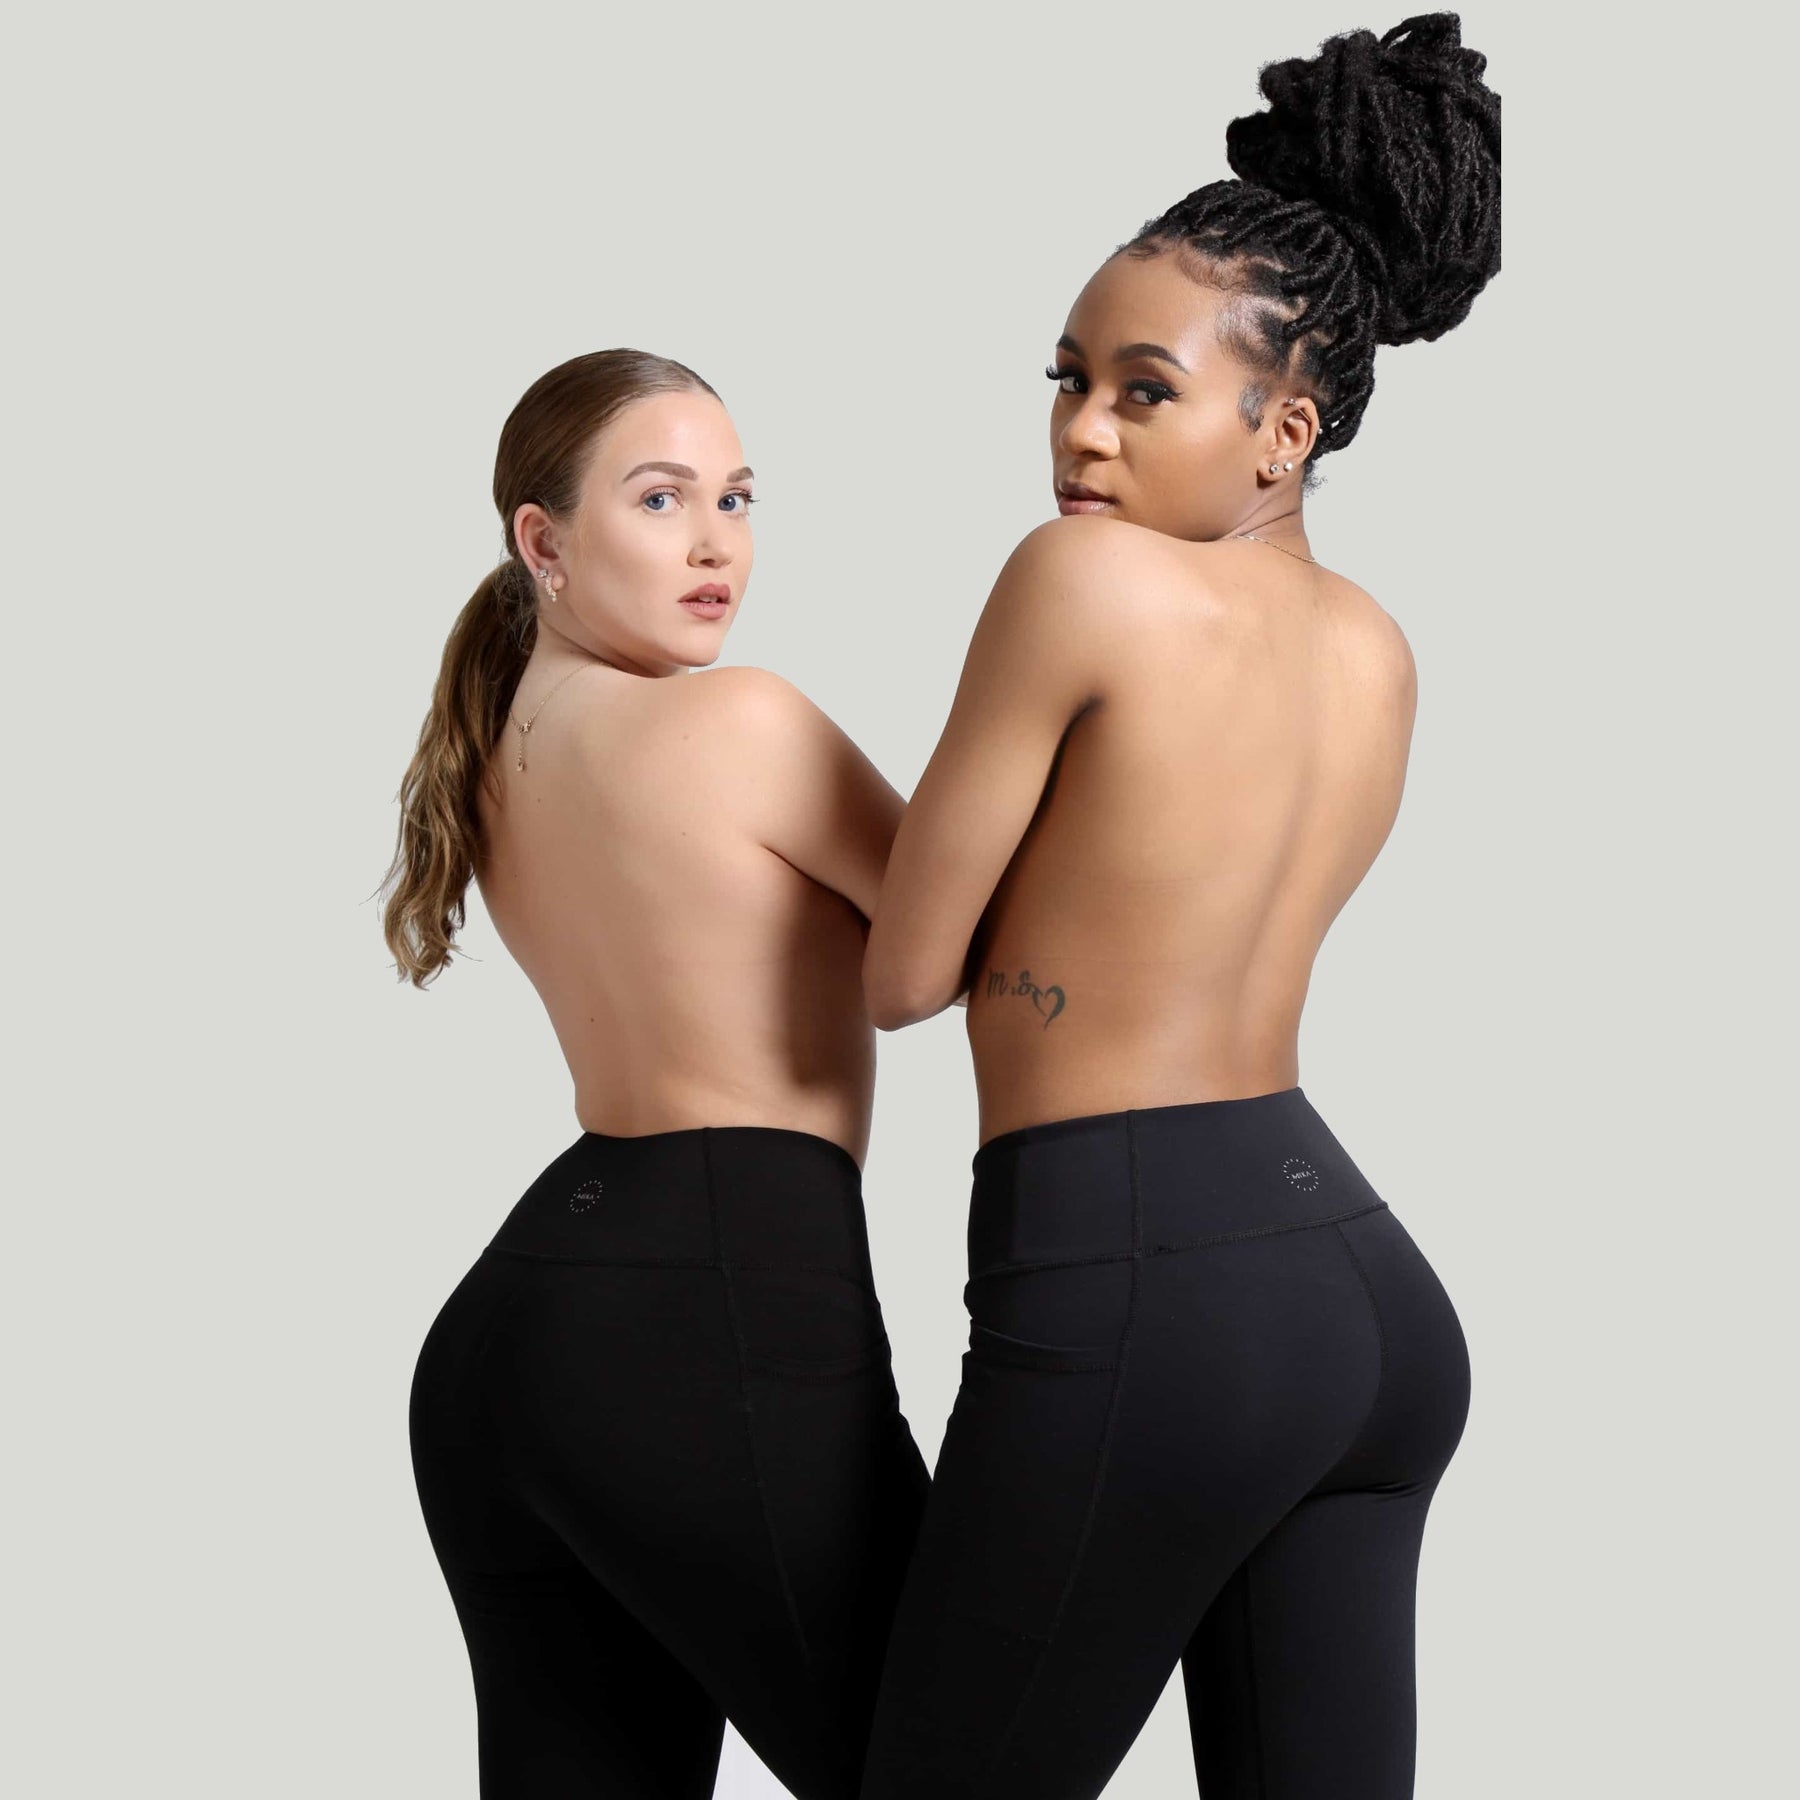 Buy Yoga Leggings For Women, Workout Pants With Pockets